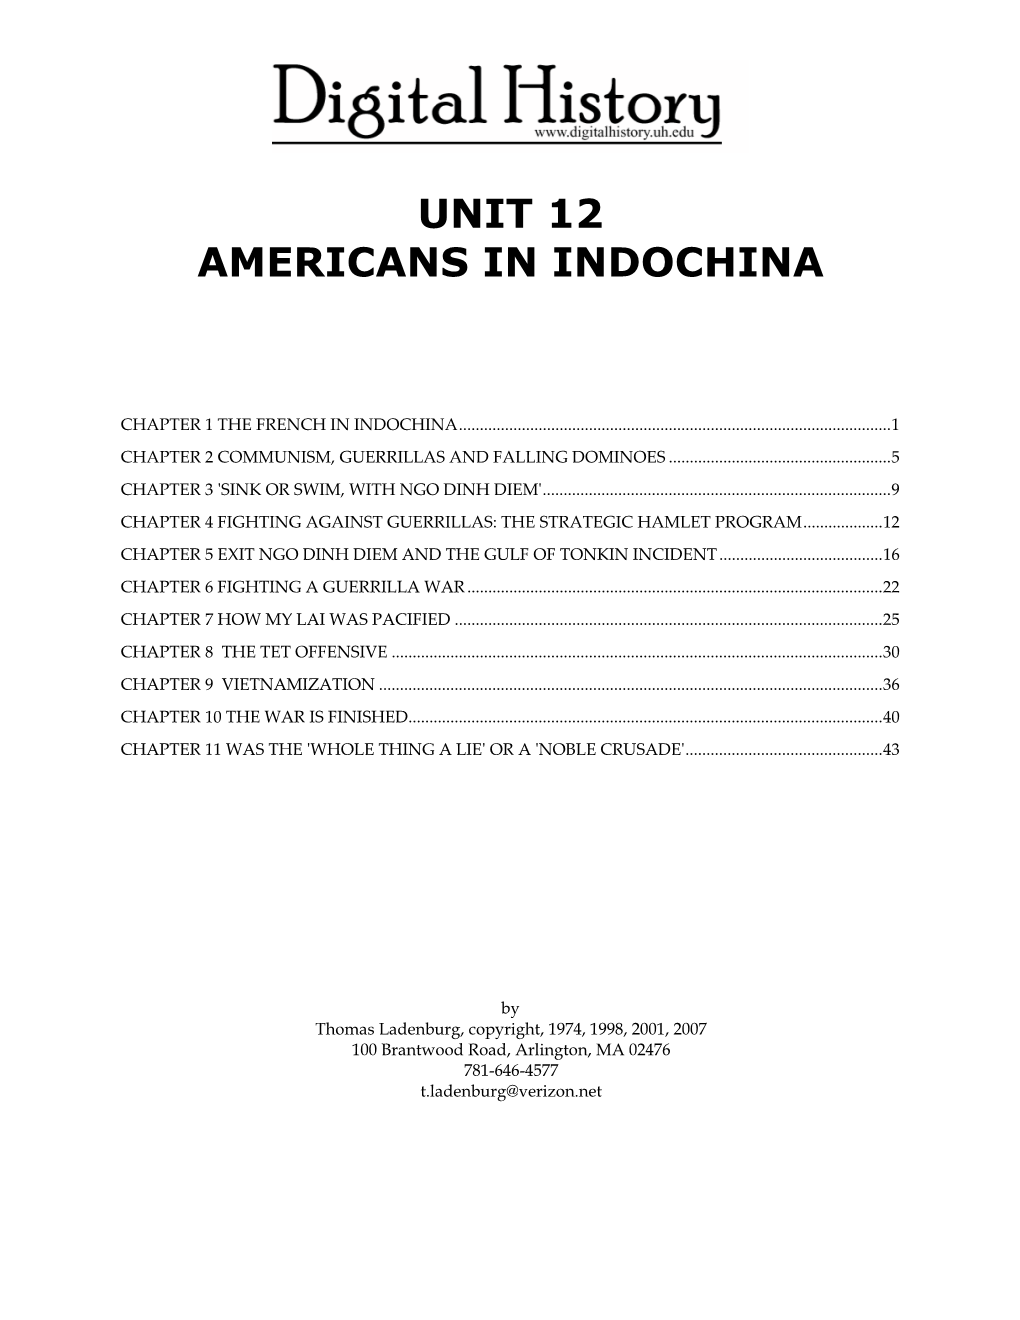 Unit 12 Americans in Indochina